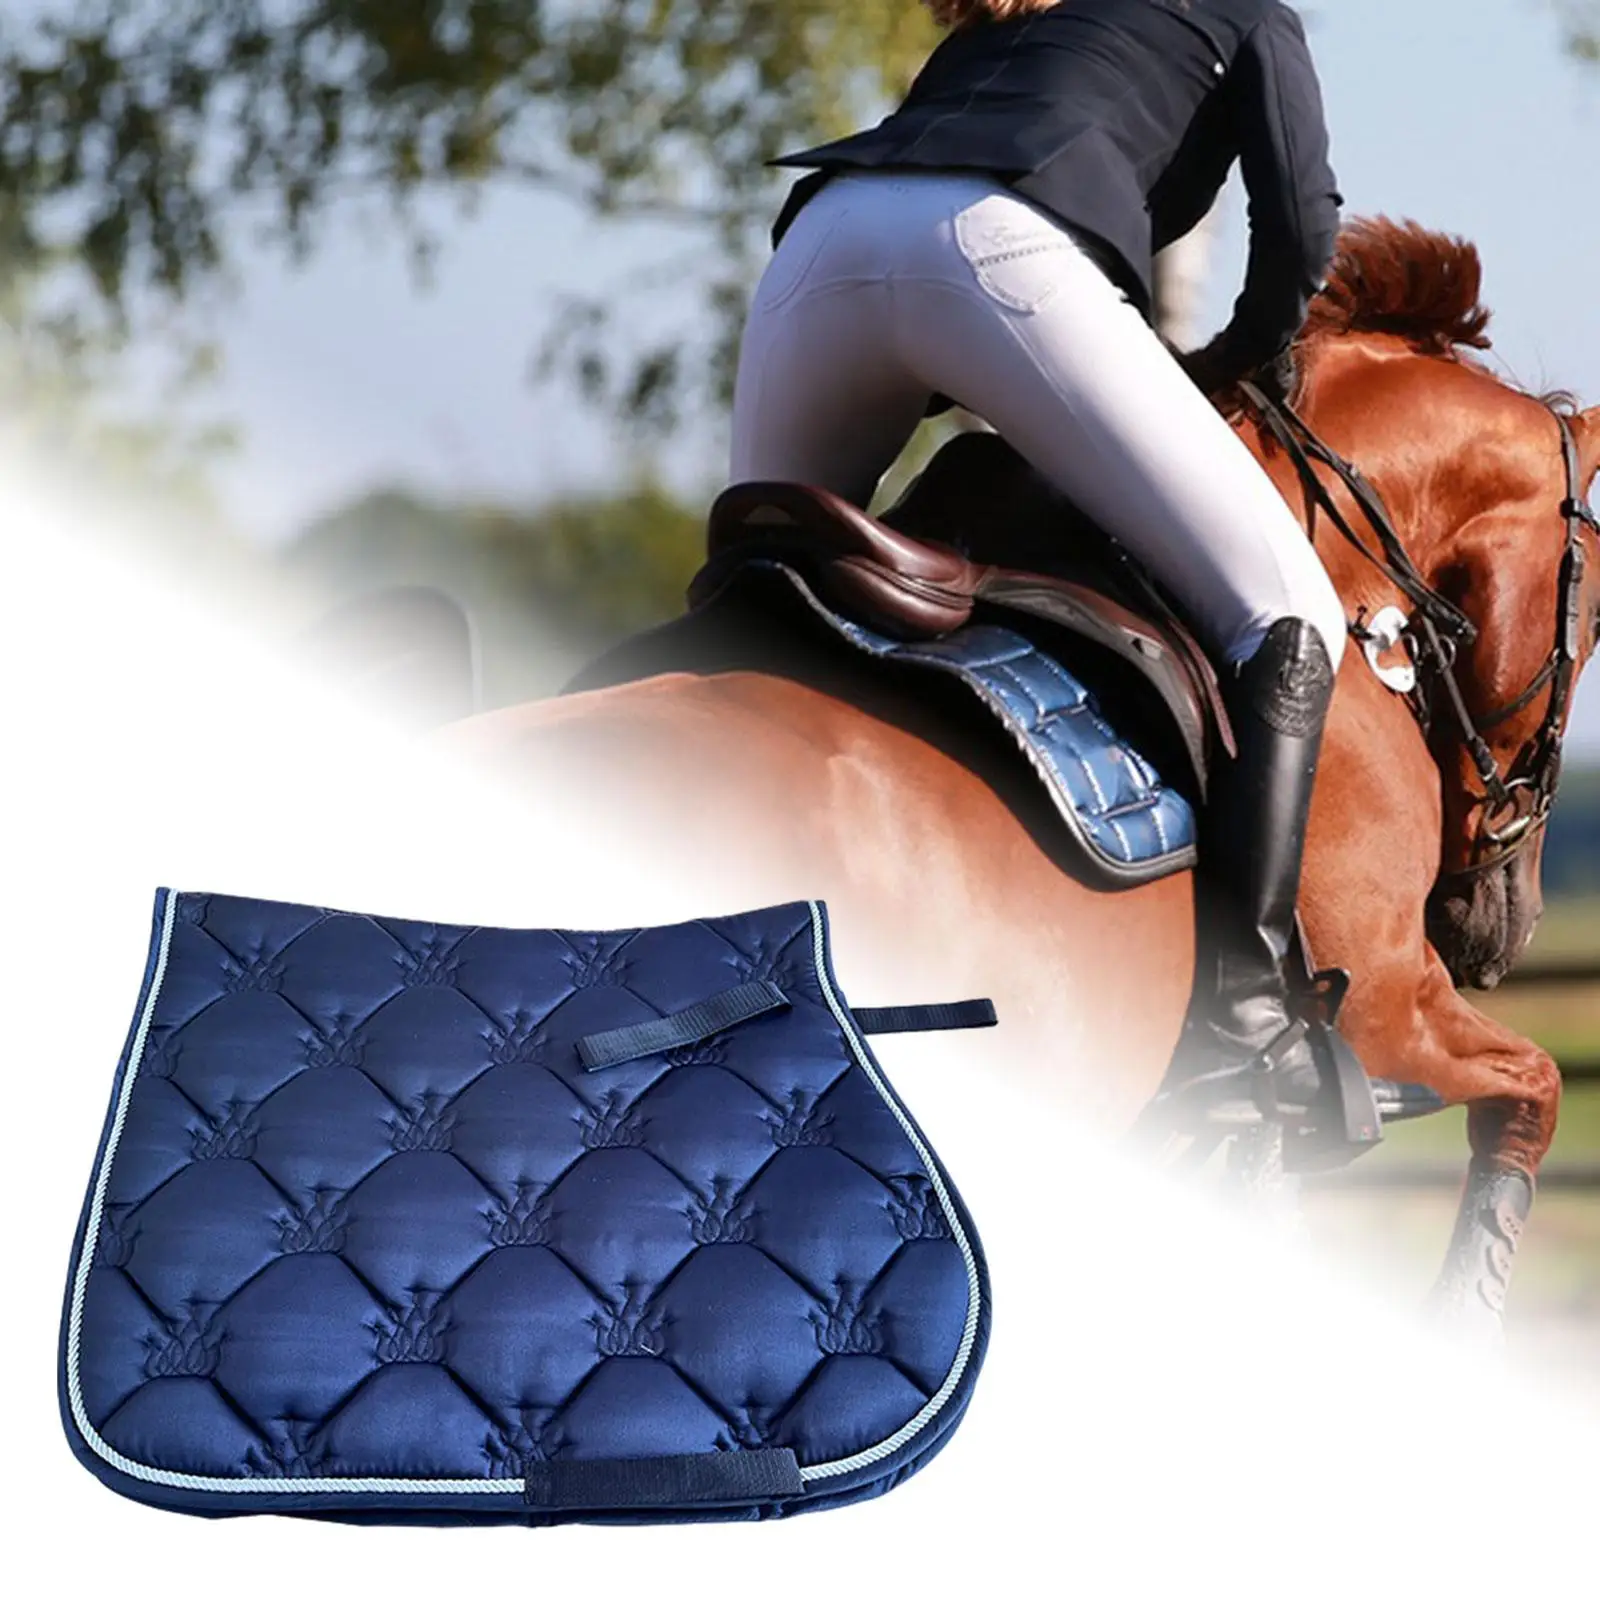 Horse Riding Pad Thickening Equestrian Riding Equipment Padding Protection Soft Shock Absorbing Breathable Western Comfort